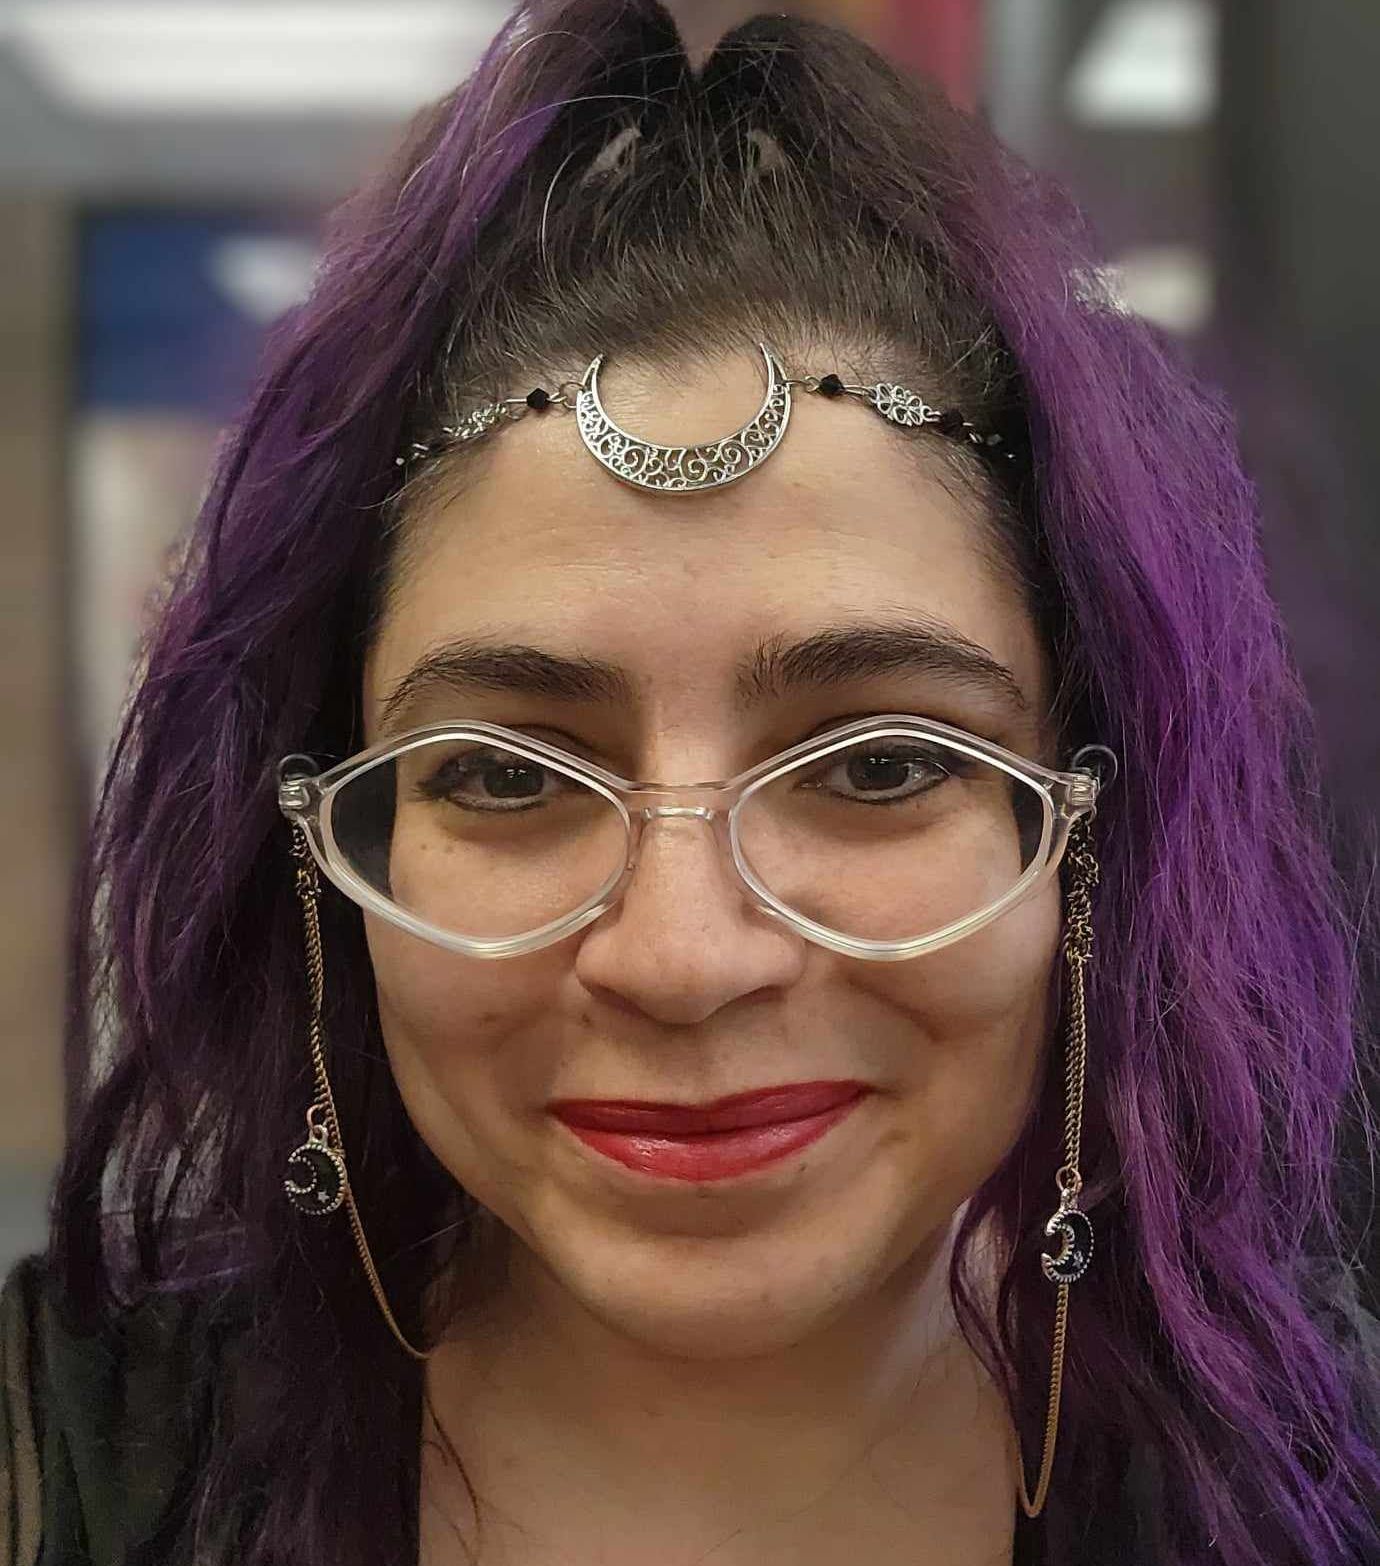 A woman with purple hair and glasses is smiling for the camera.